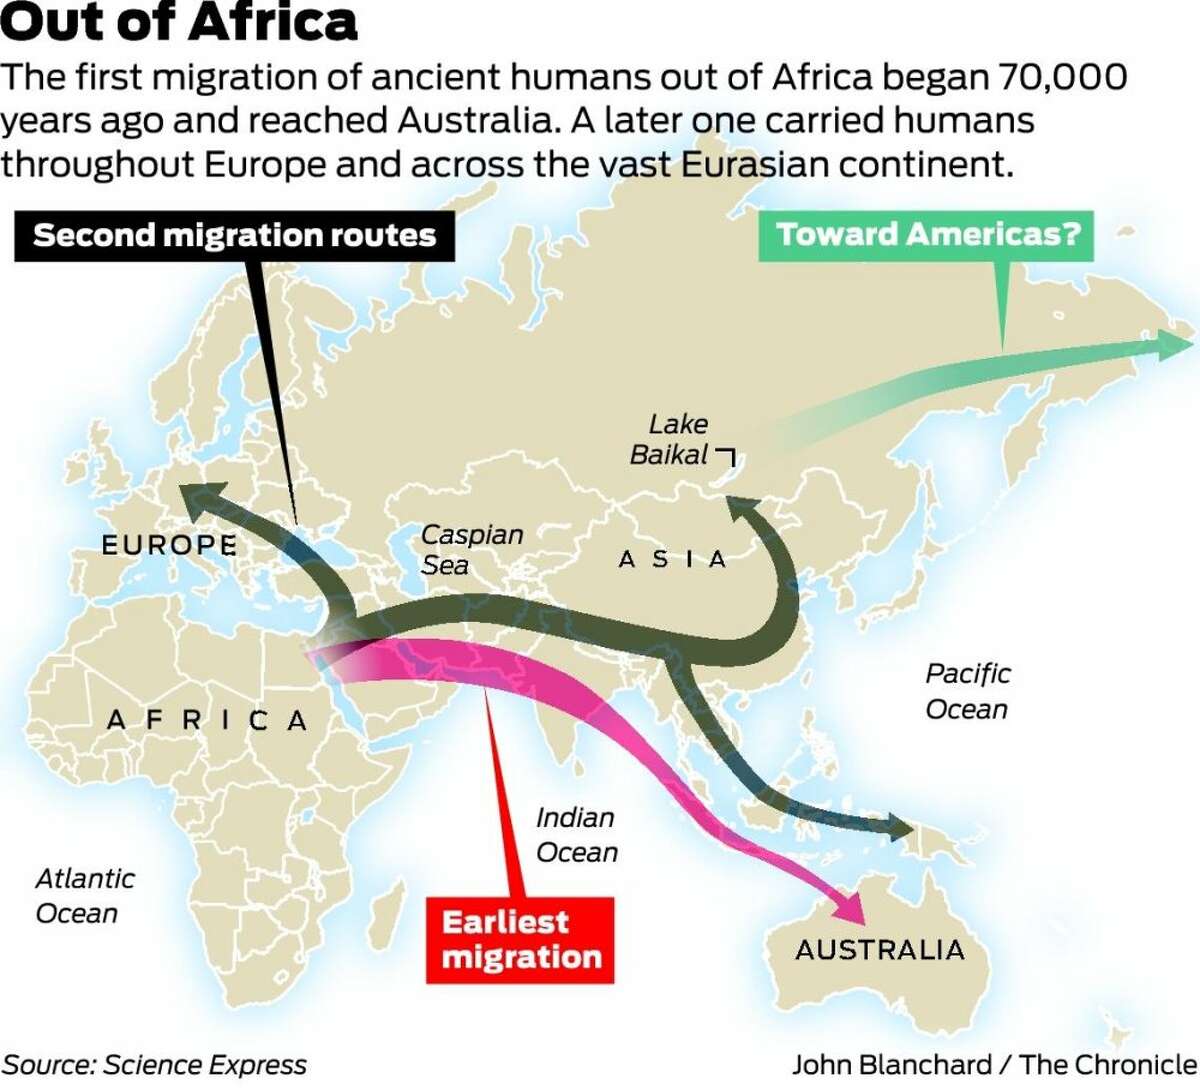 Hair DNA reveals 2 migration waves out of Africa